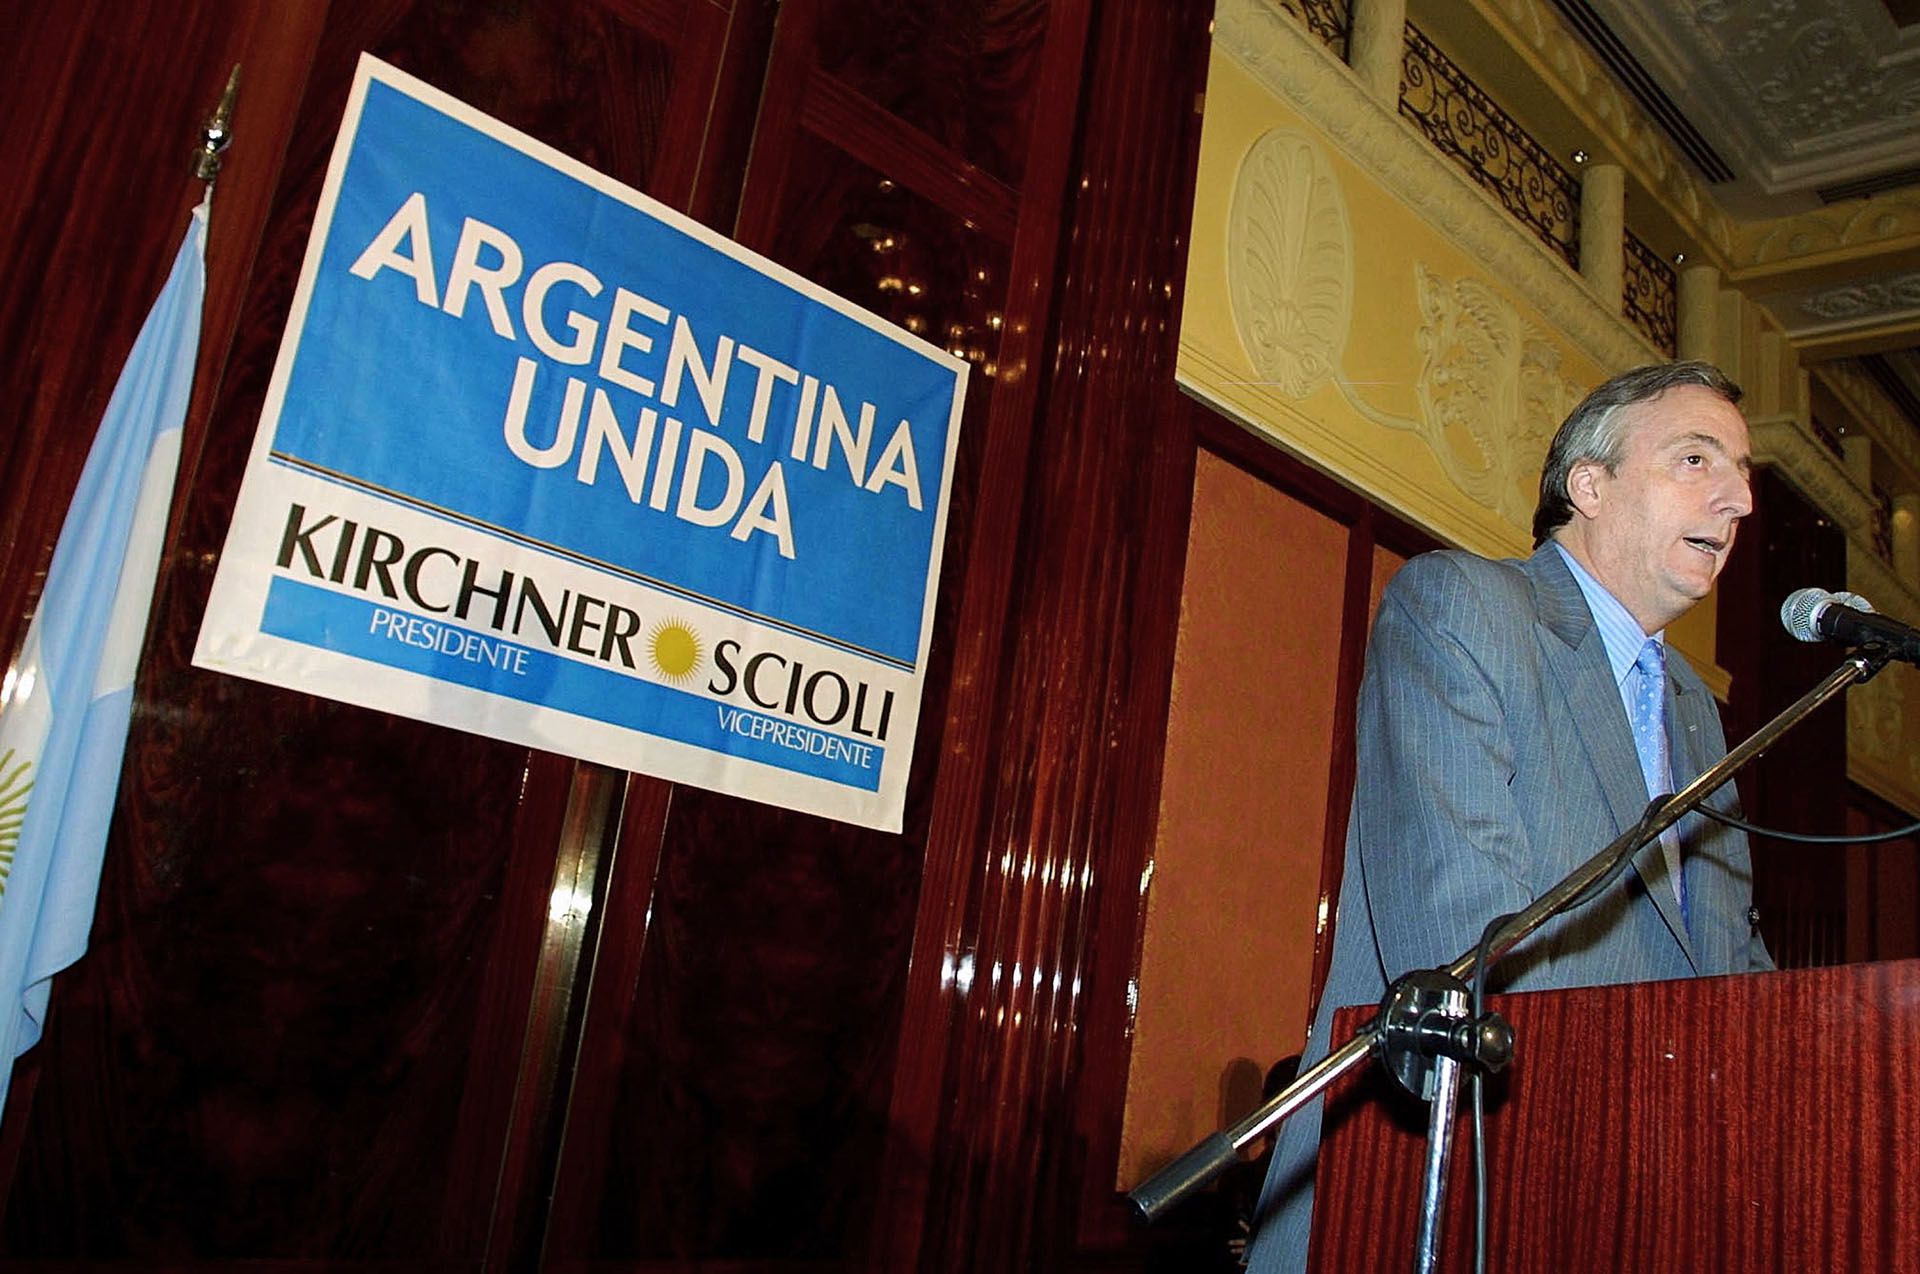 Kirchner became president in 2003, with 22.25% of the vote, after Menem's resignation from the runoff (Photo by Quique Kierszenbaum/Getty Images)